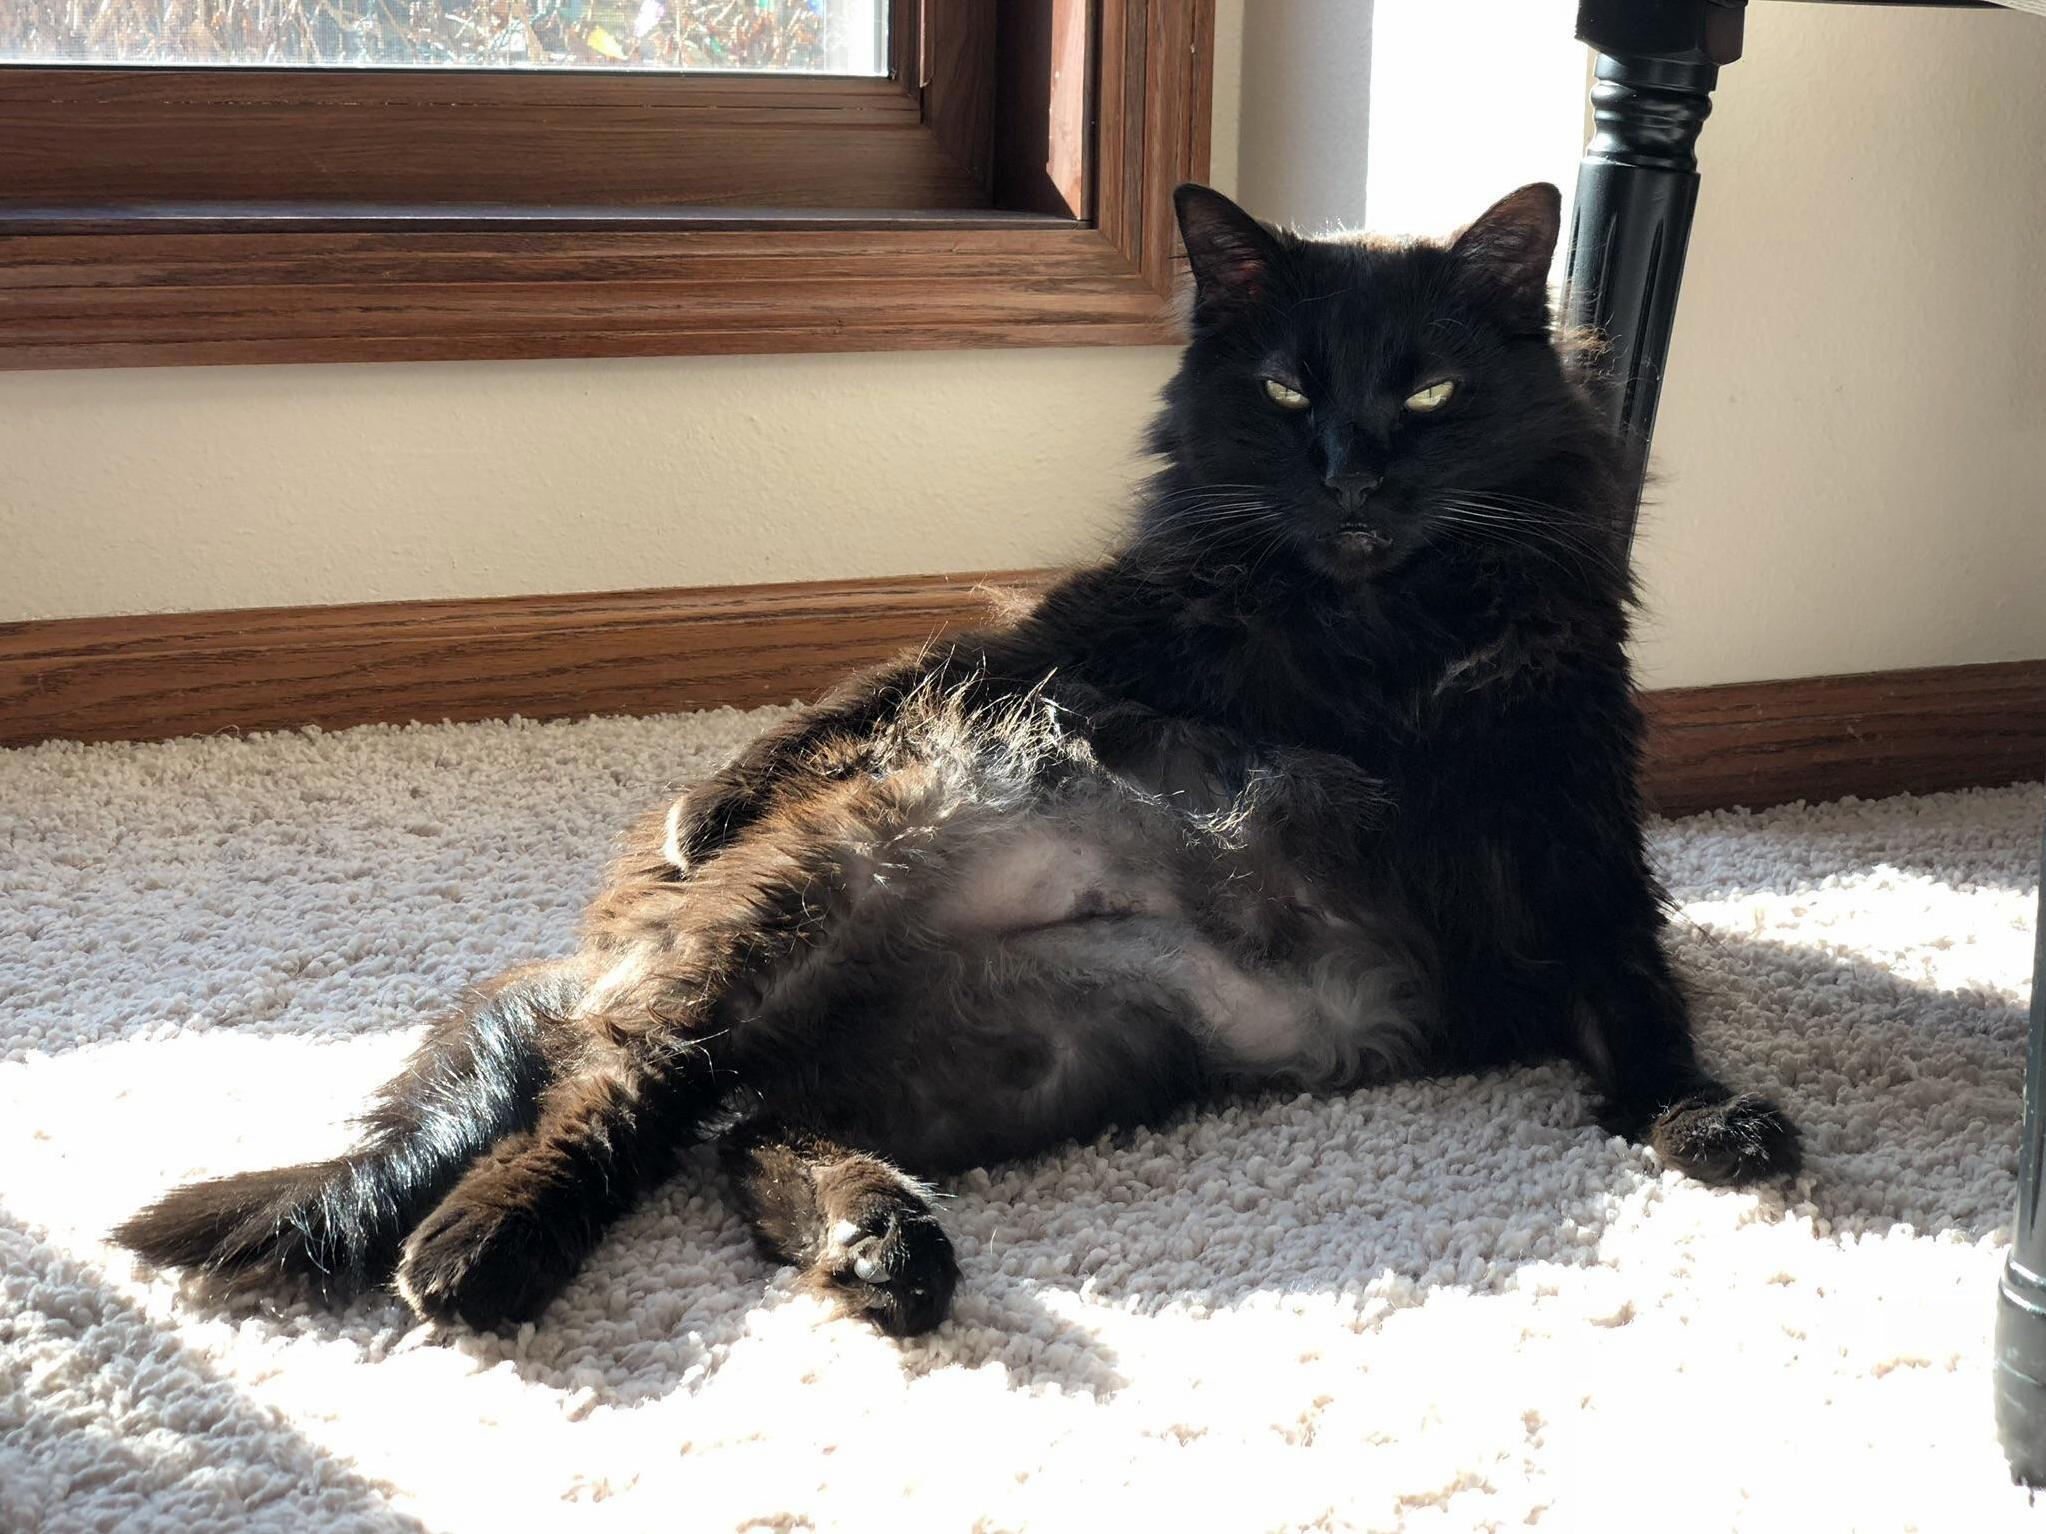 Draw me like one of your french cats